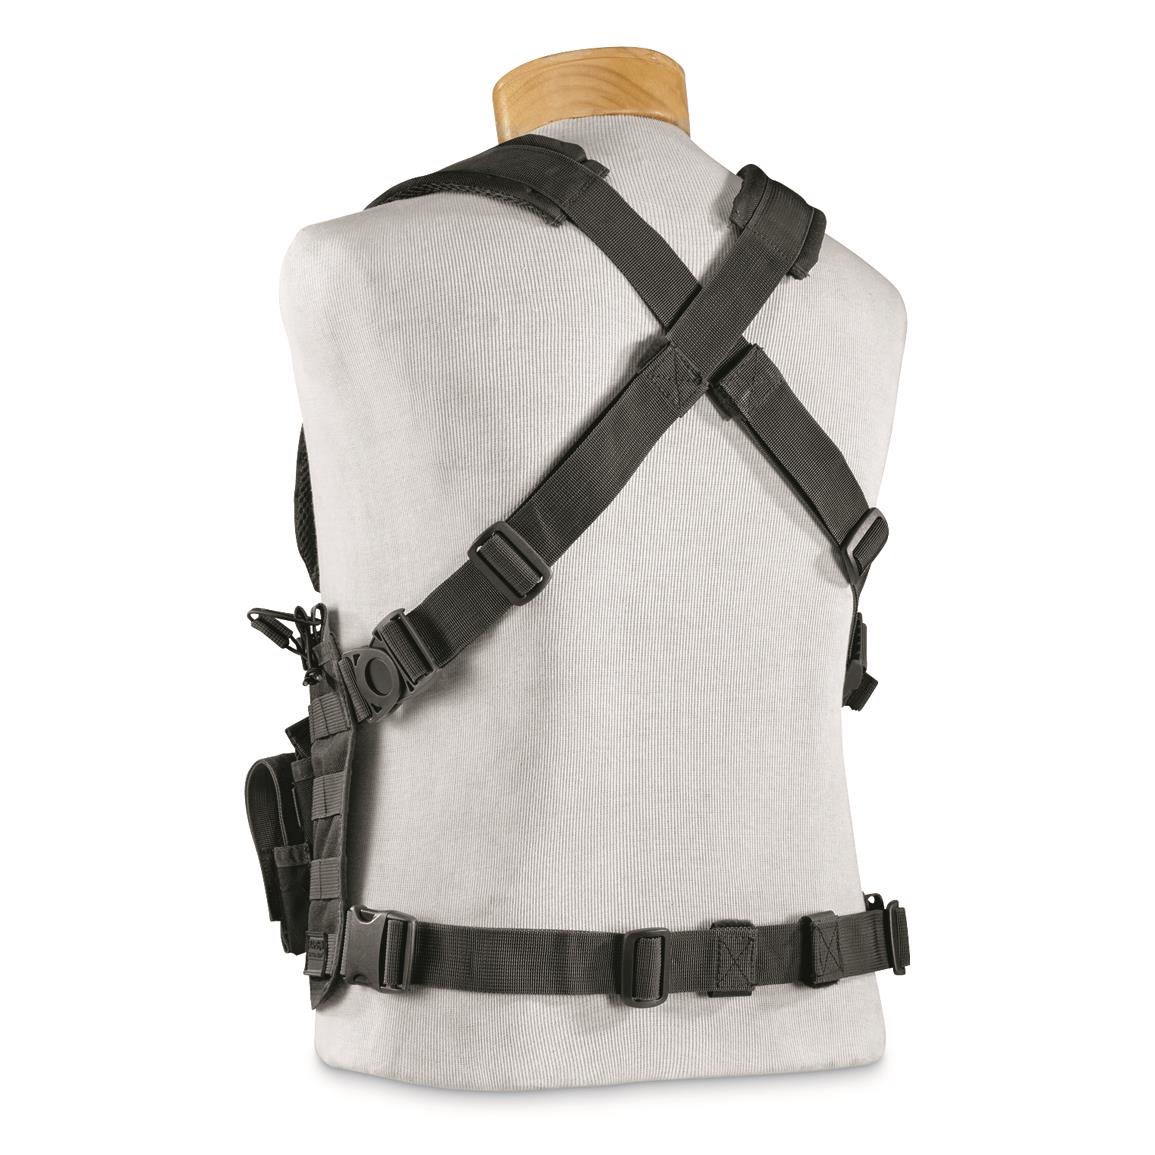 Rapid Dominance MOLLE Chest Rig - 705492, Tactical Clothing at ...